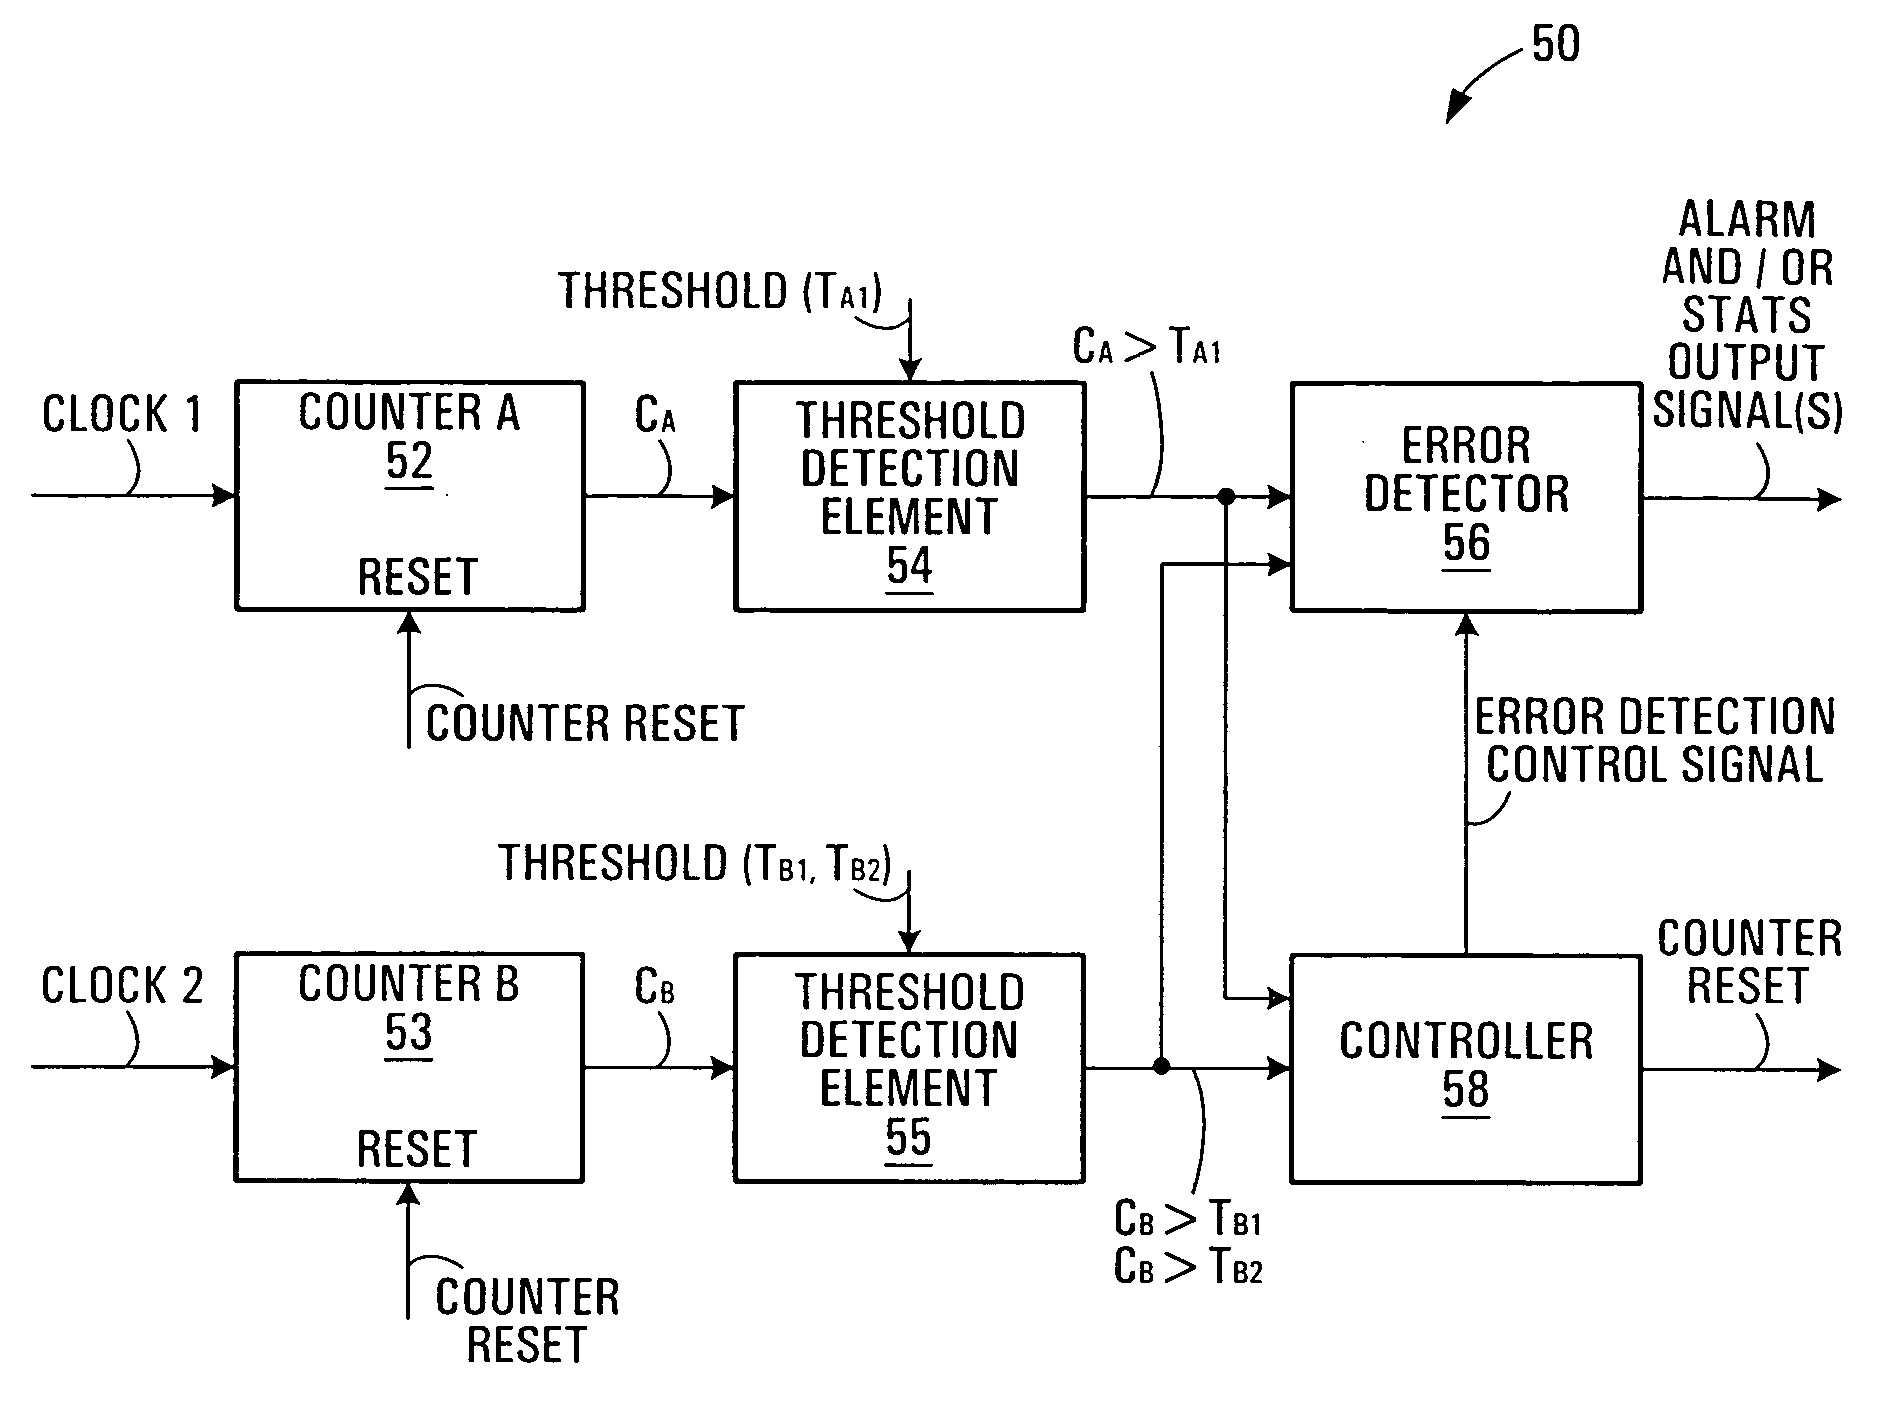 Periodic electrical signal frequency monitoring systems and methods